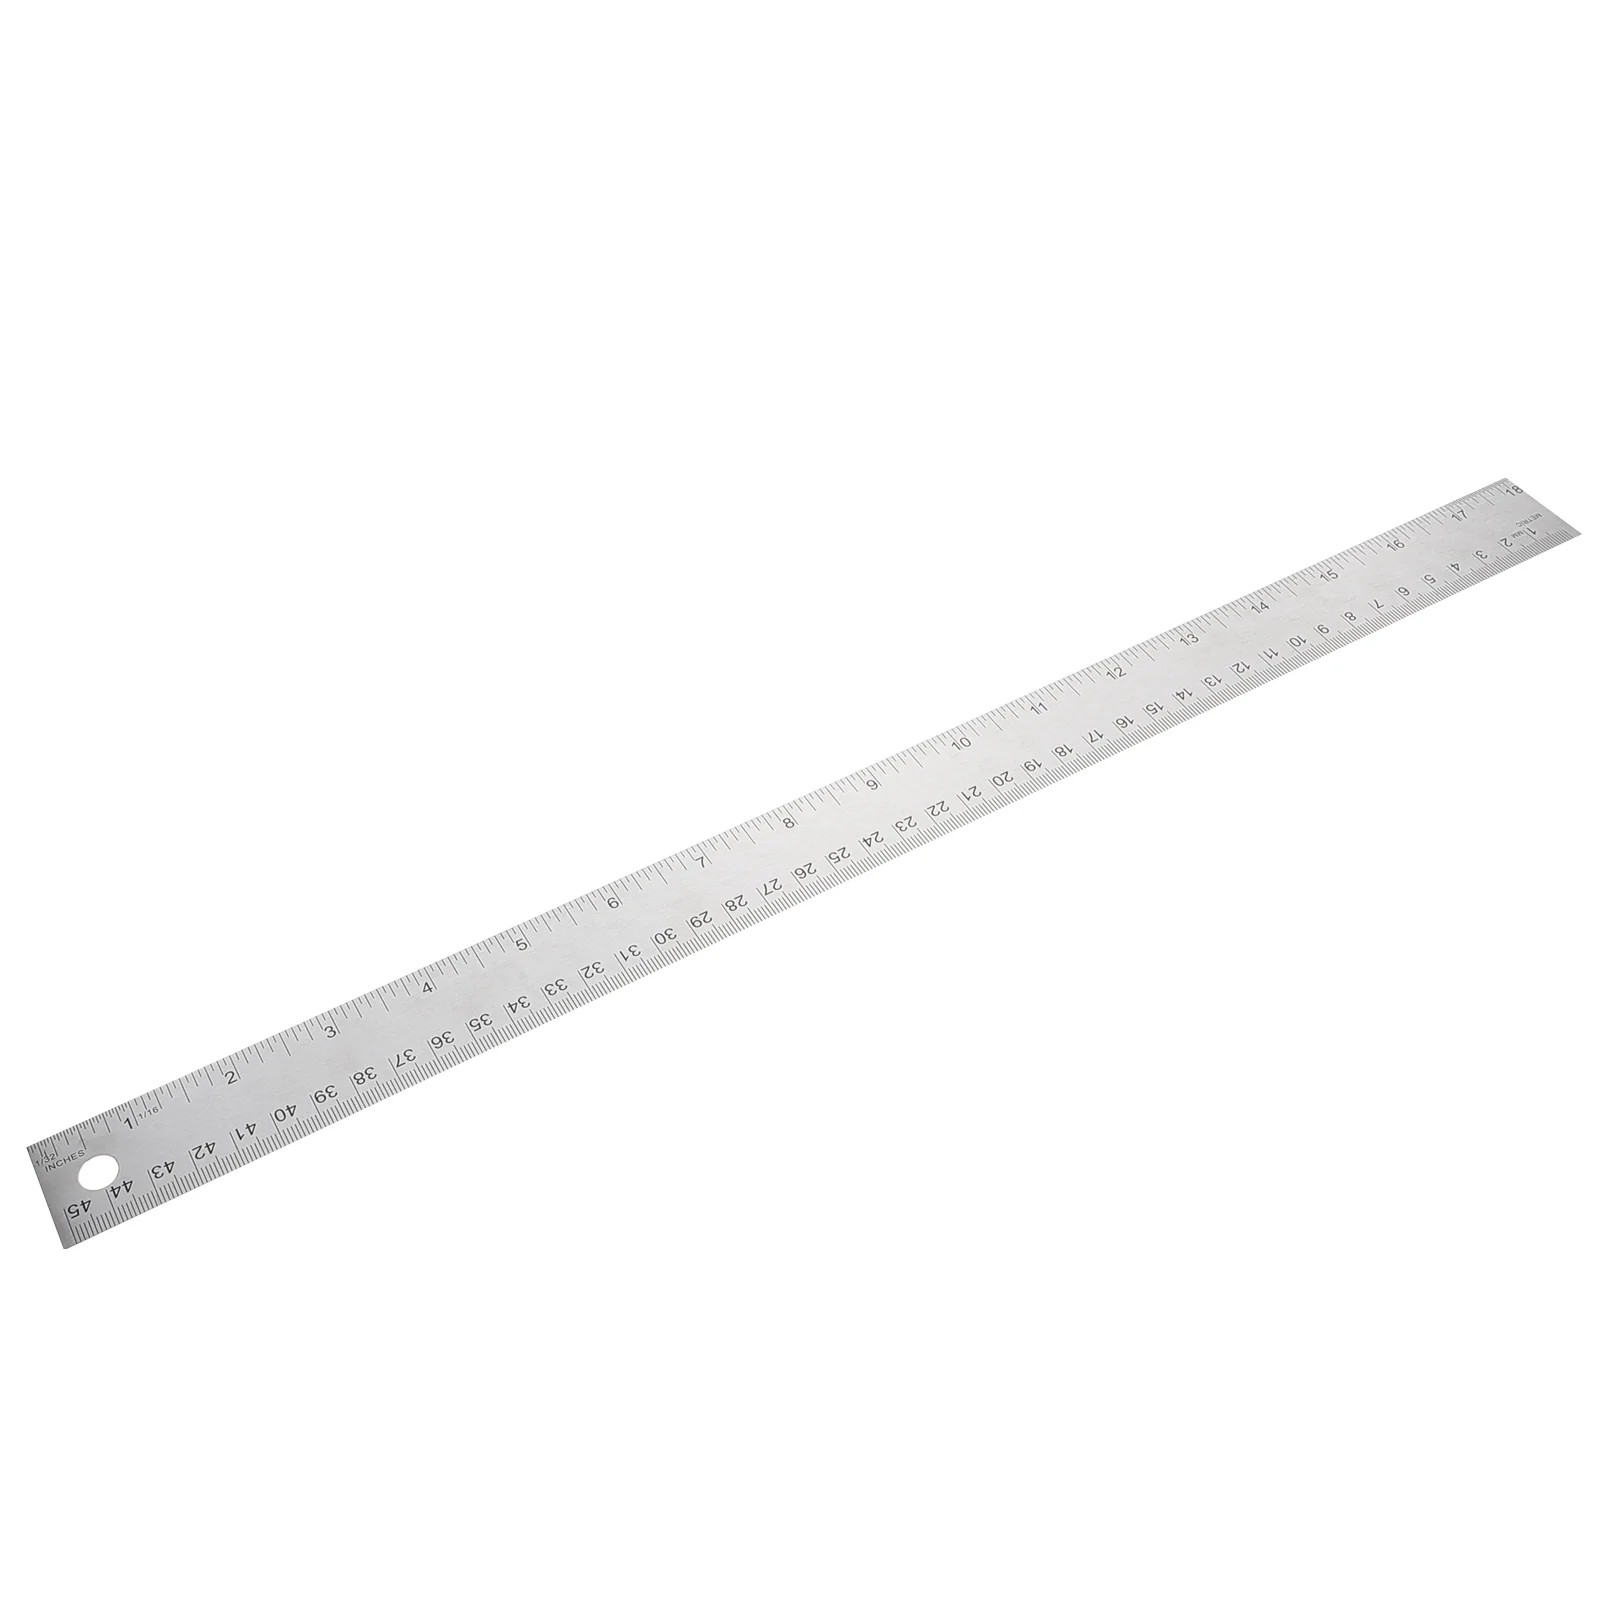 

Stainless Steel Cork Ruler School Straight Edges Rulers Kids Student Office Woodworking Precision